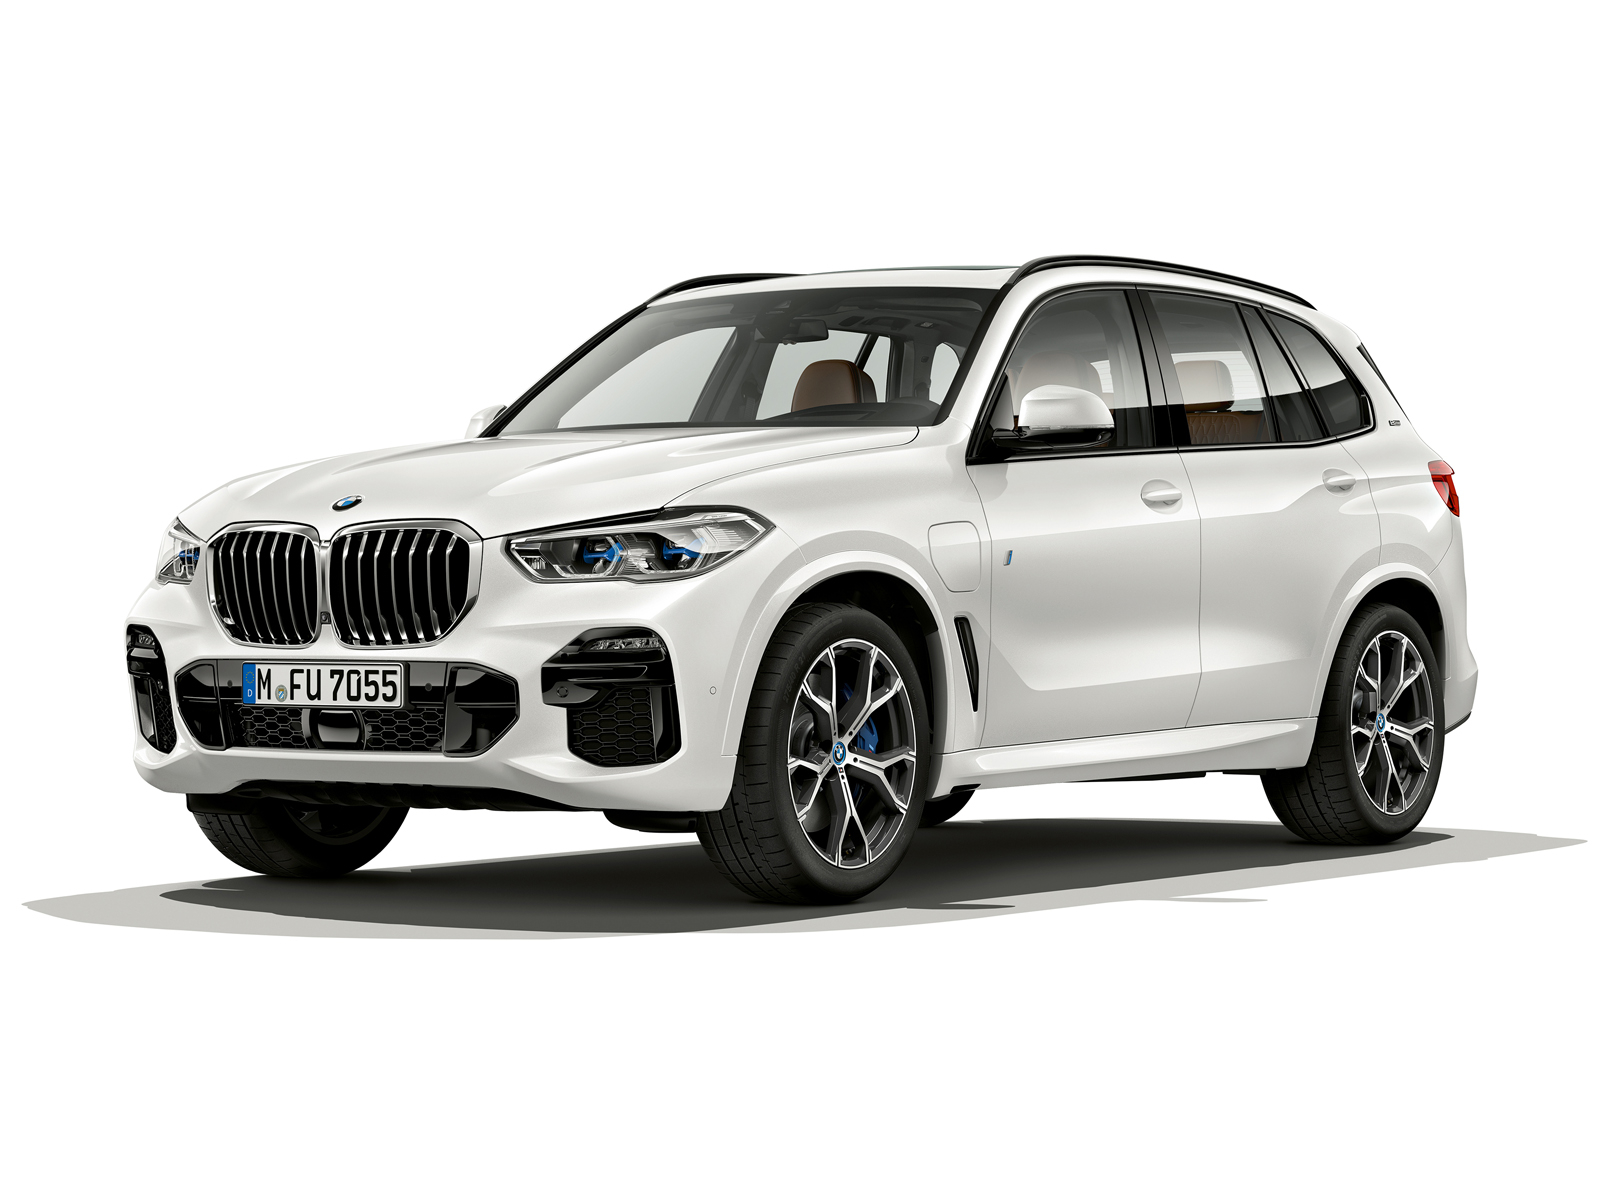 Bmw X5 Xdrive 45e Iperformance Coming To The Us In 2020 throughout proportions 1600 X 1200